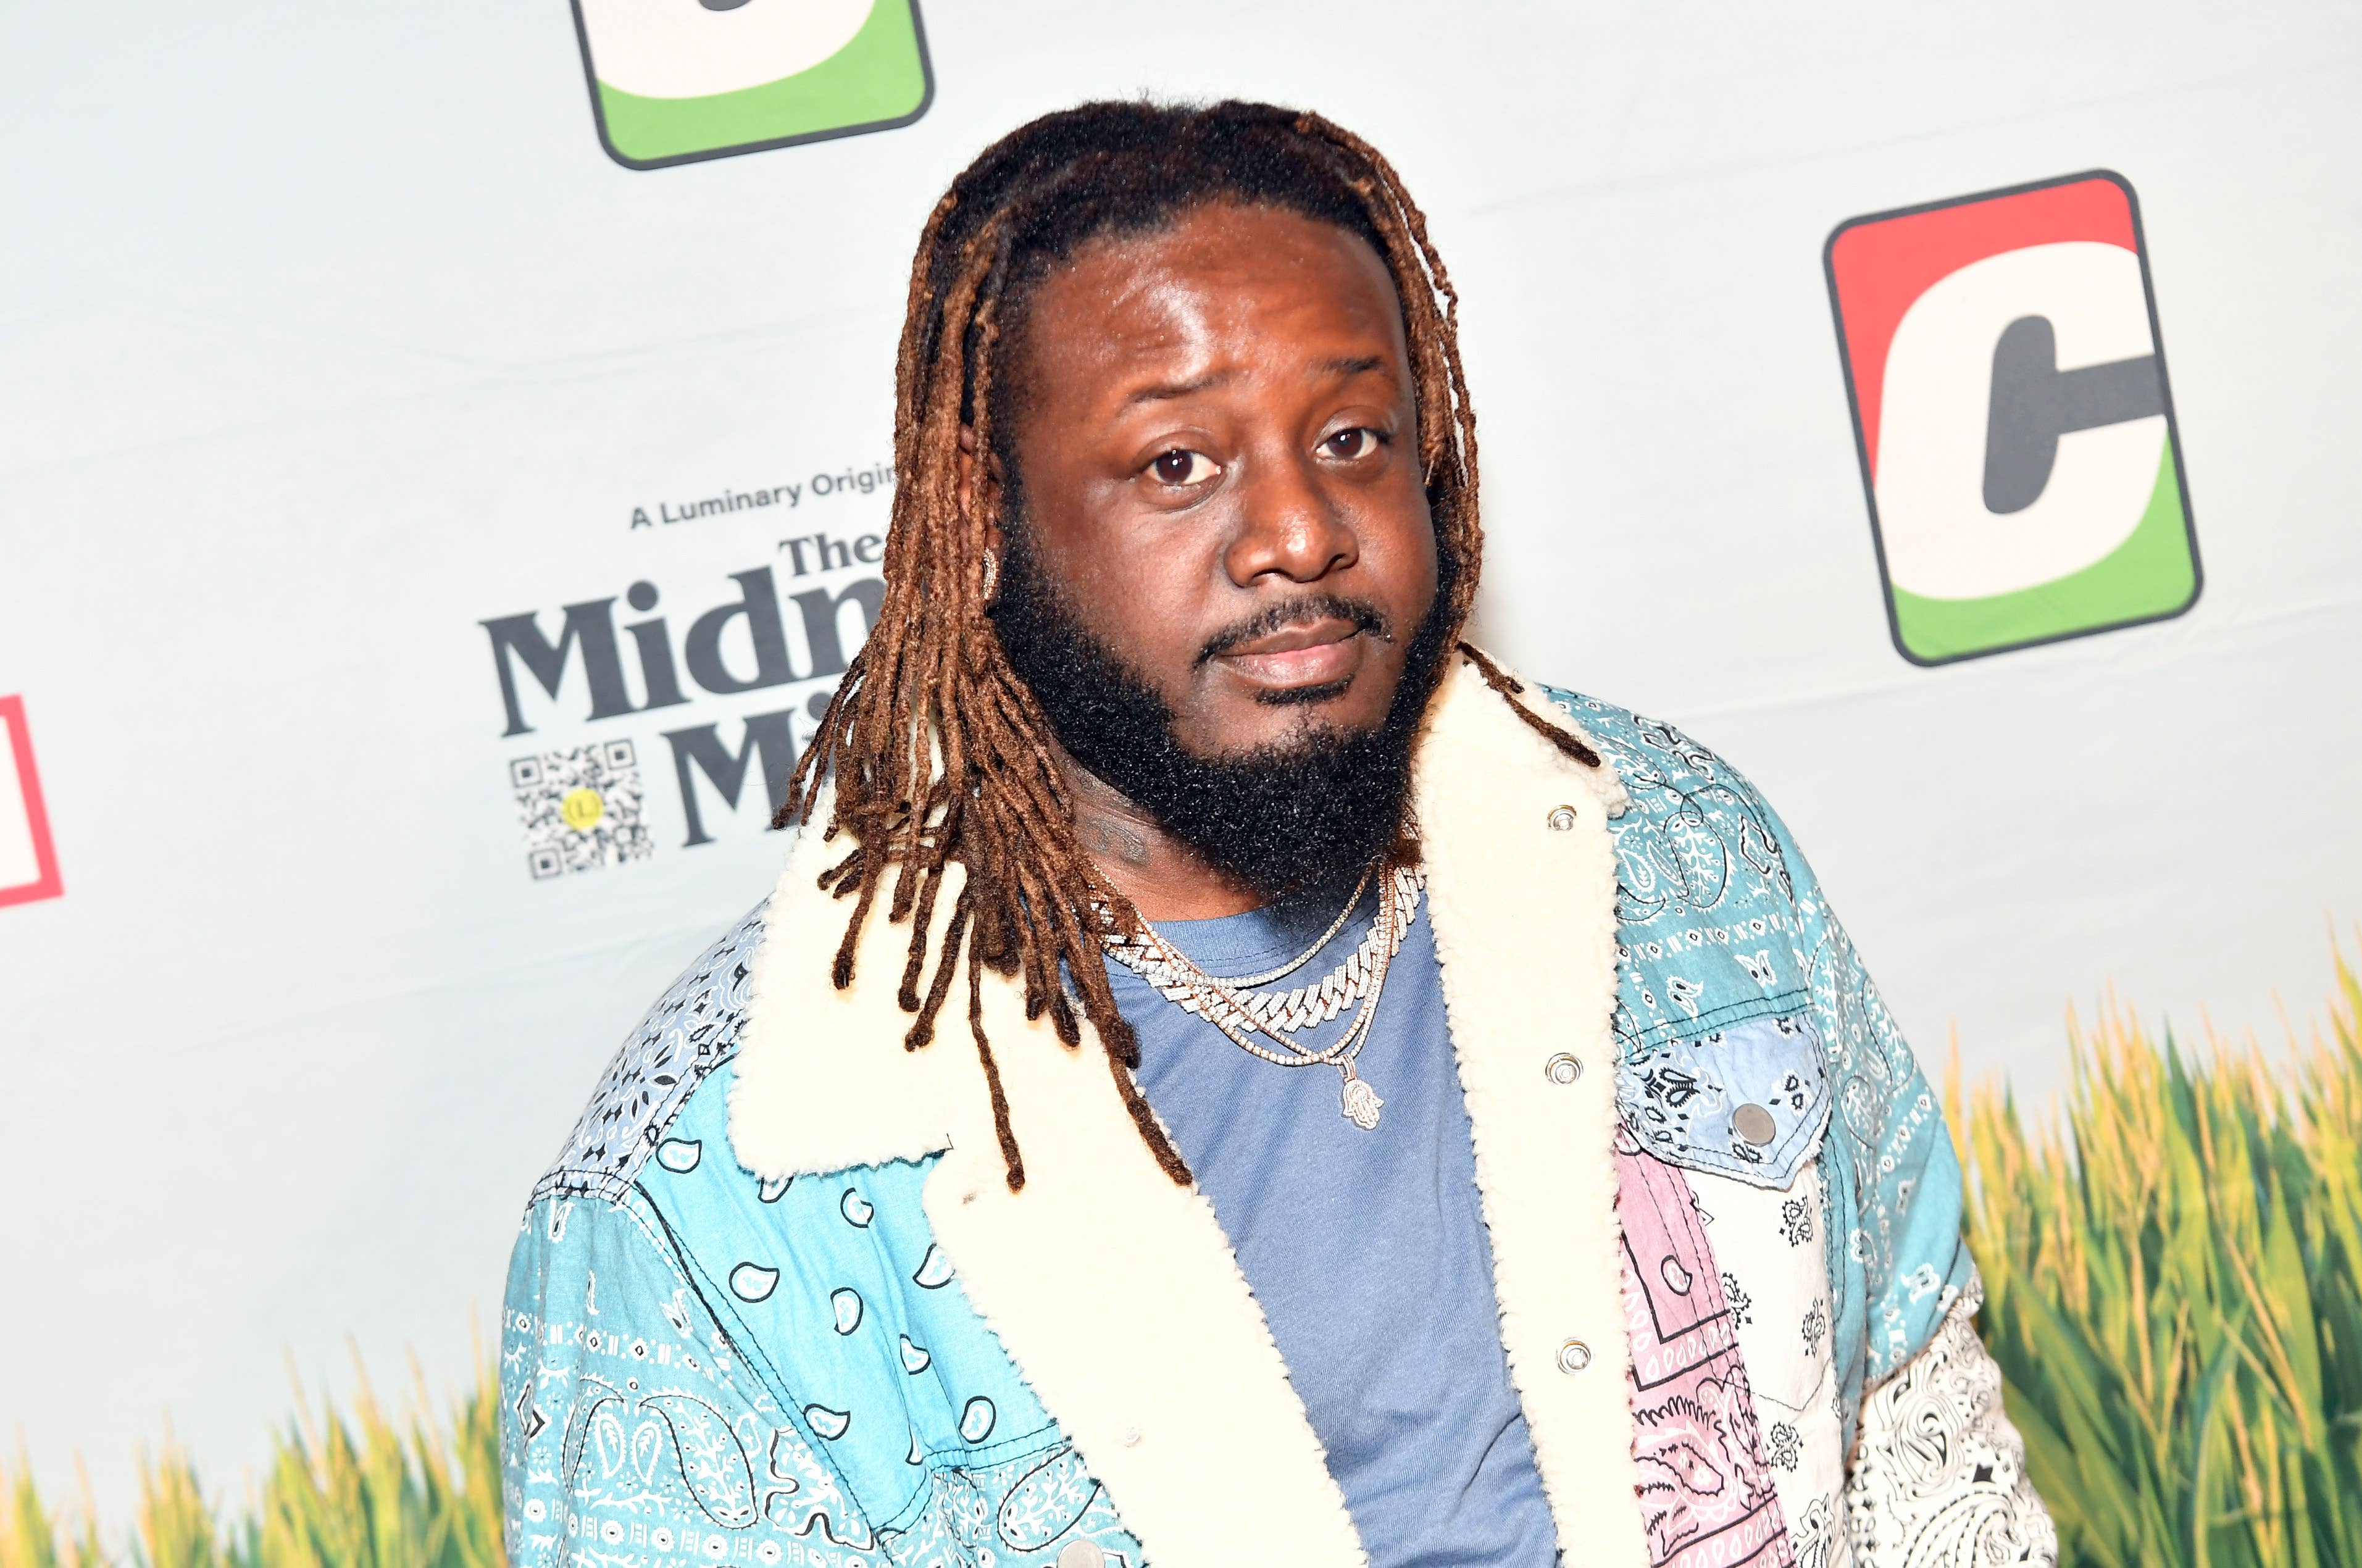 T-Pain attending screening for Dave Chappelle documentary